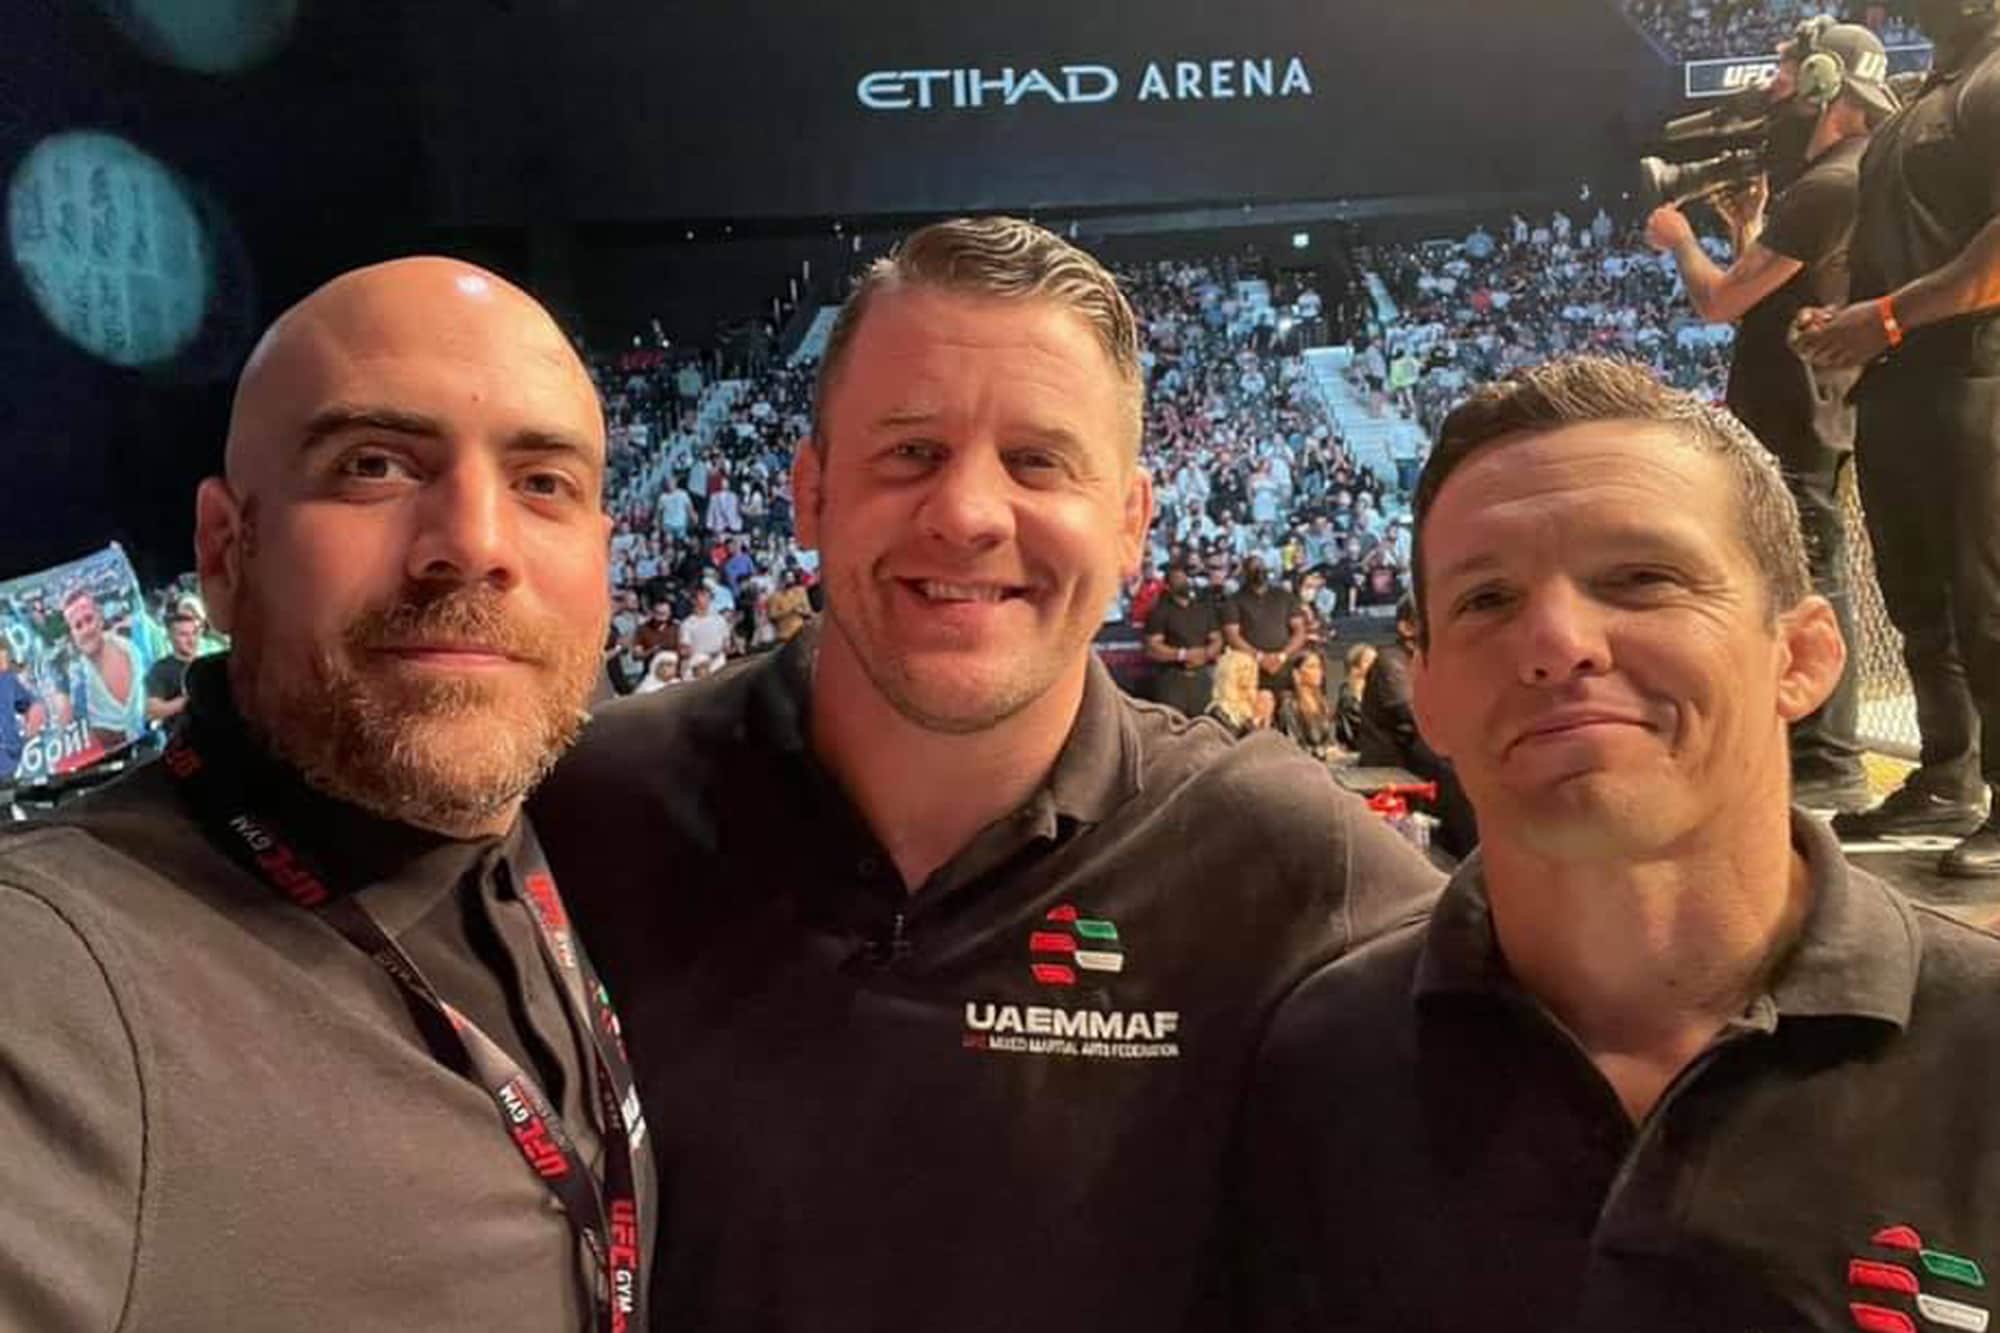 The UAE Mixed Martial Arts Federation is Working Closely with the UFC and IMMAF